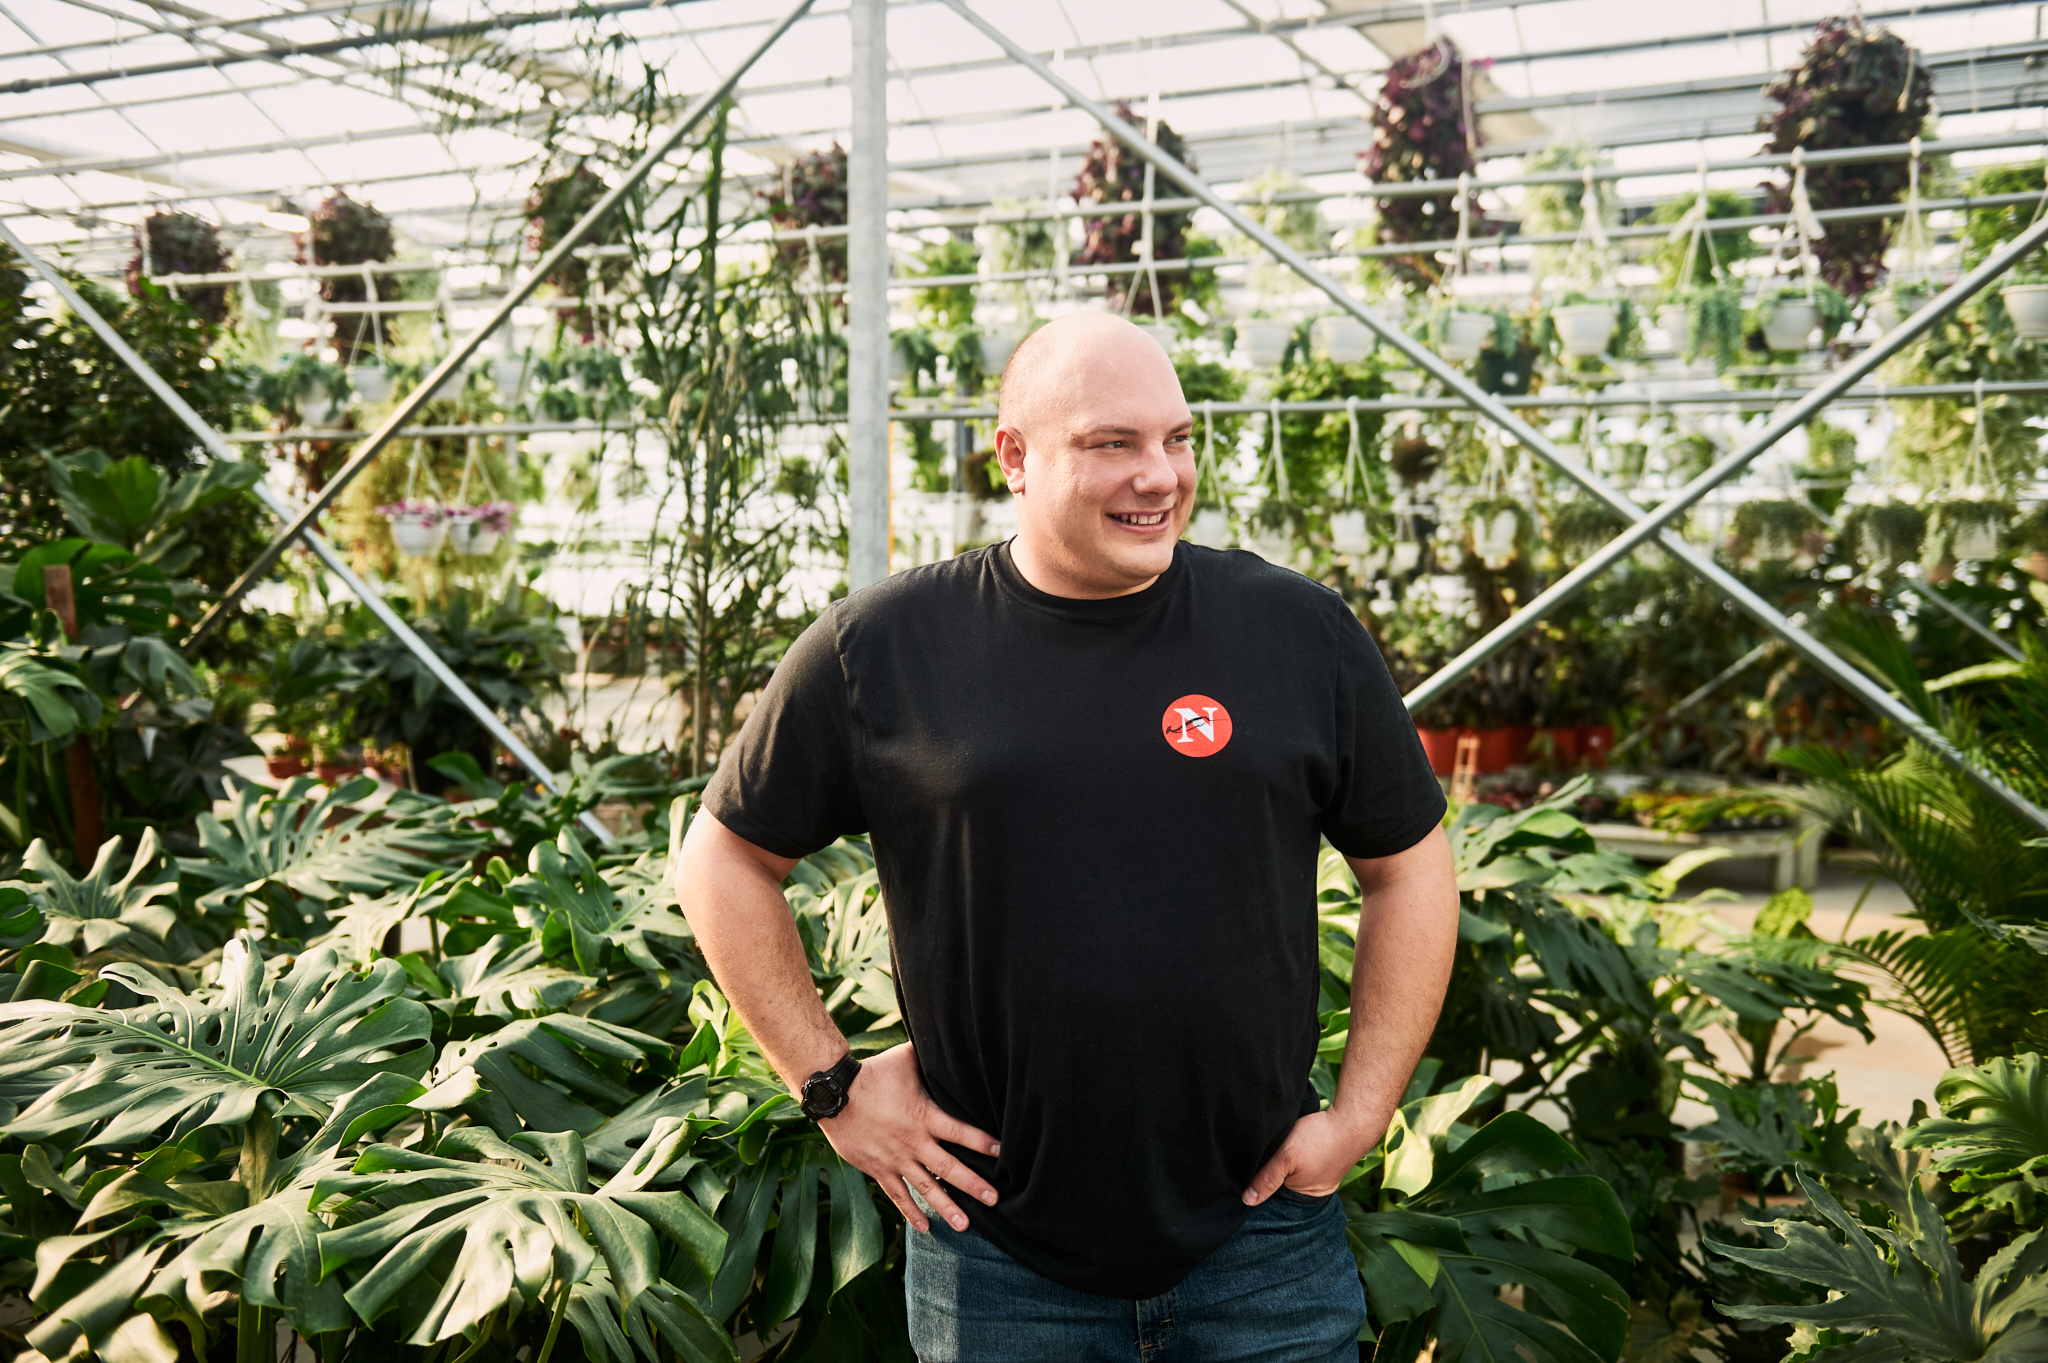 Reporter Carl Meyer is all smiles rocking a Narwhal T-shirt in a greenhouse.